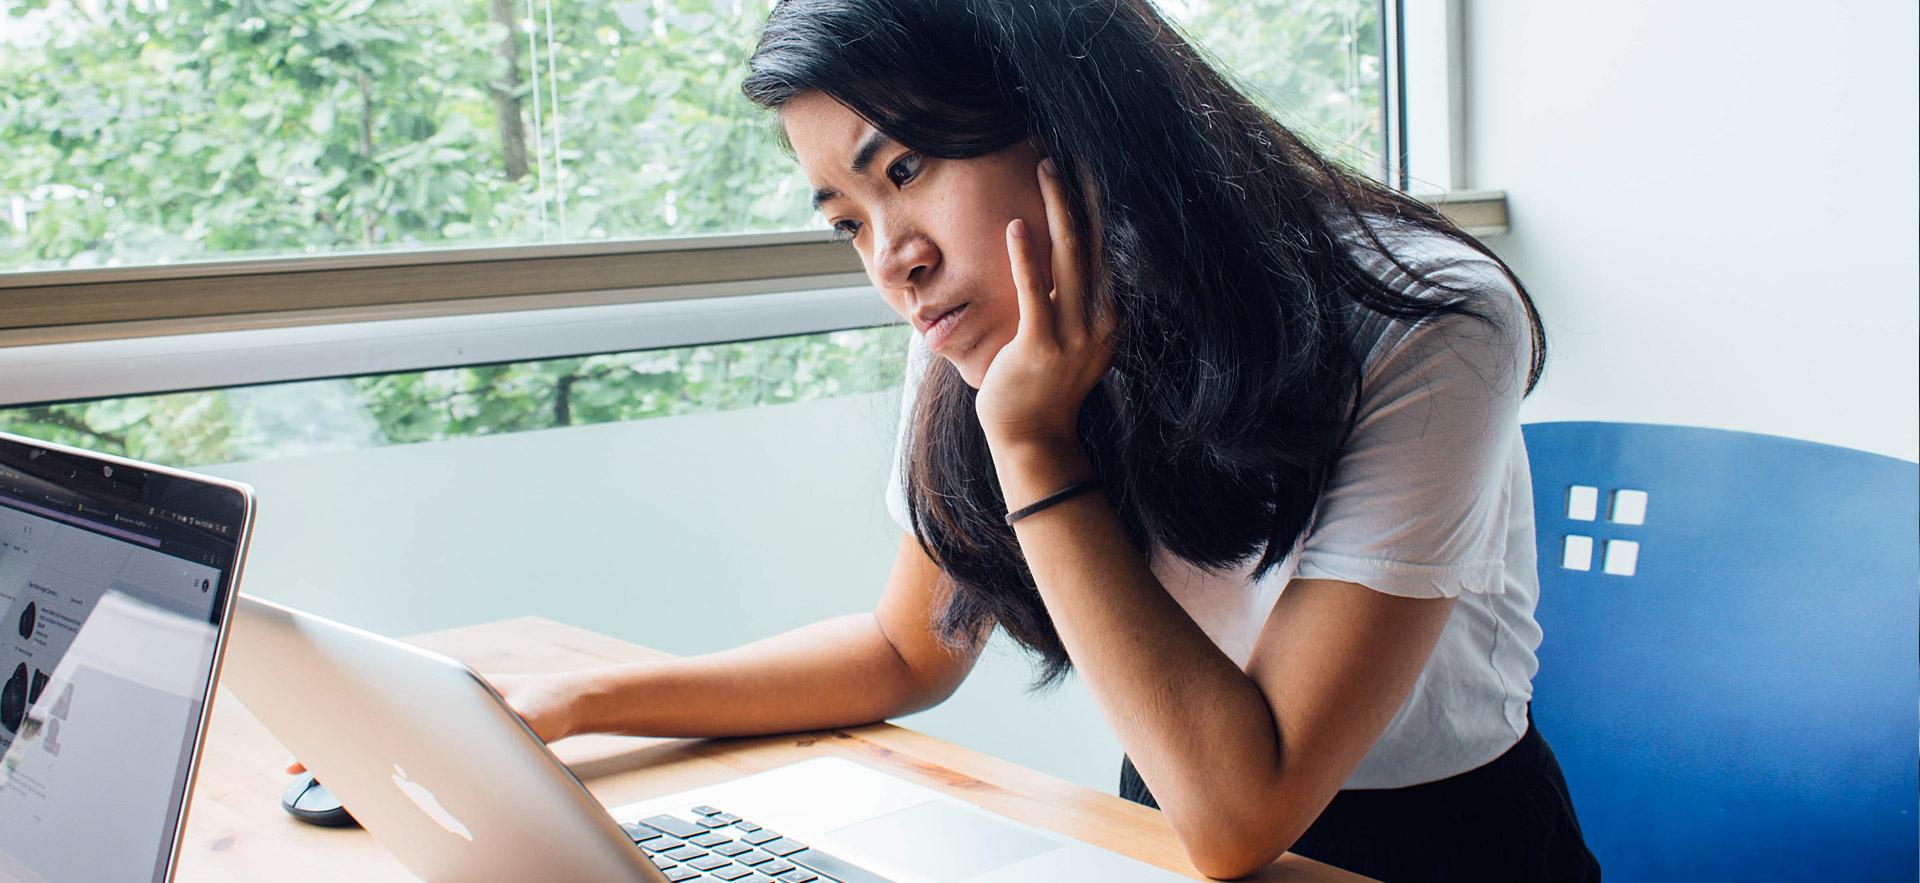 Female student thinking while on computer.